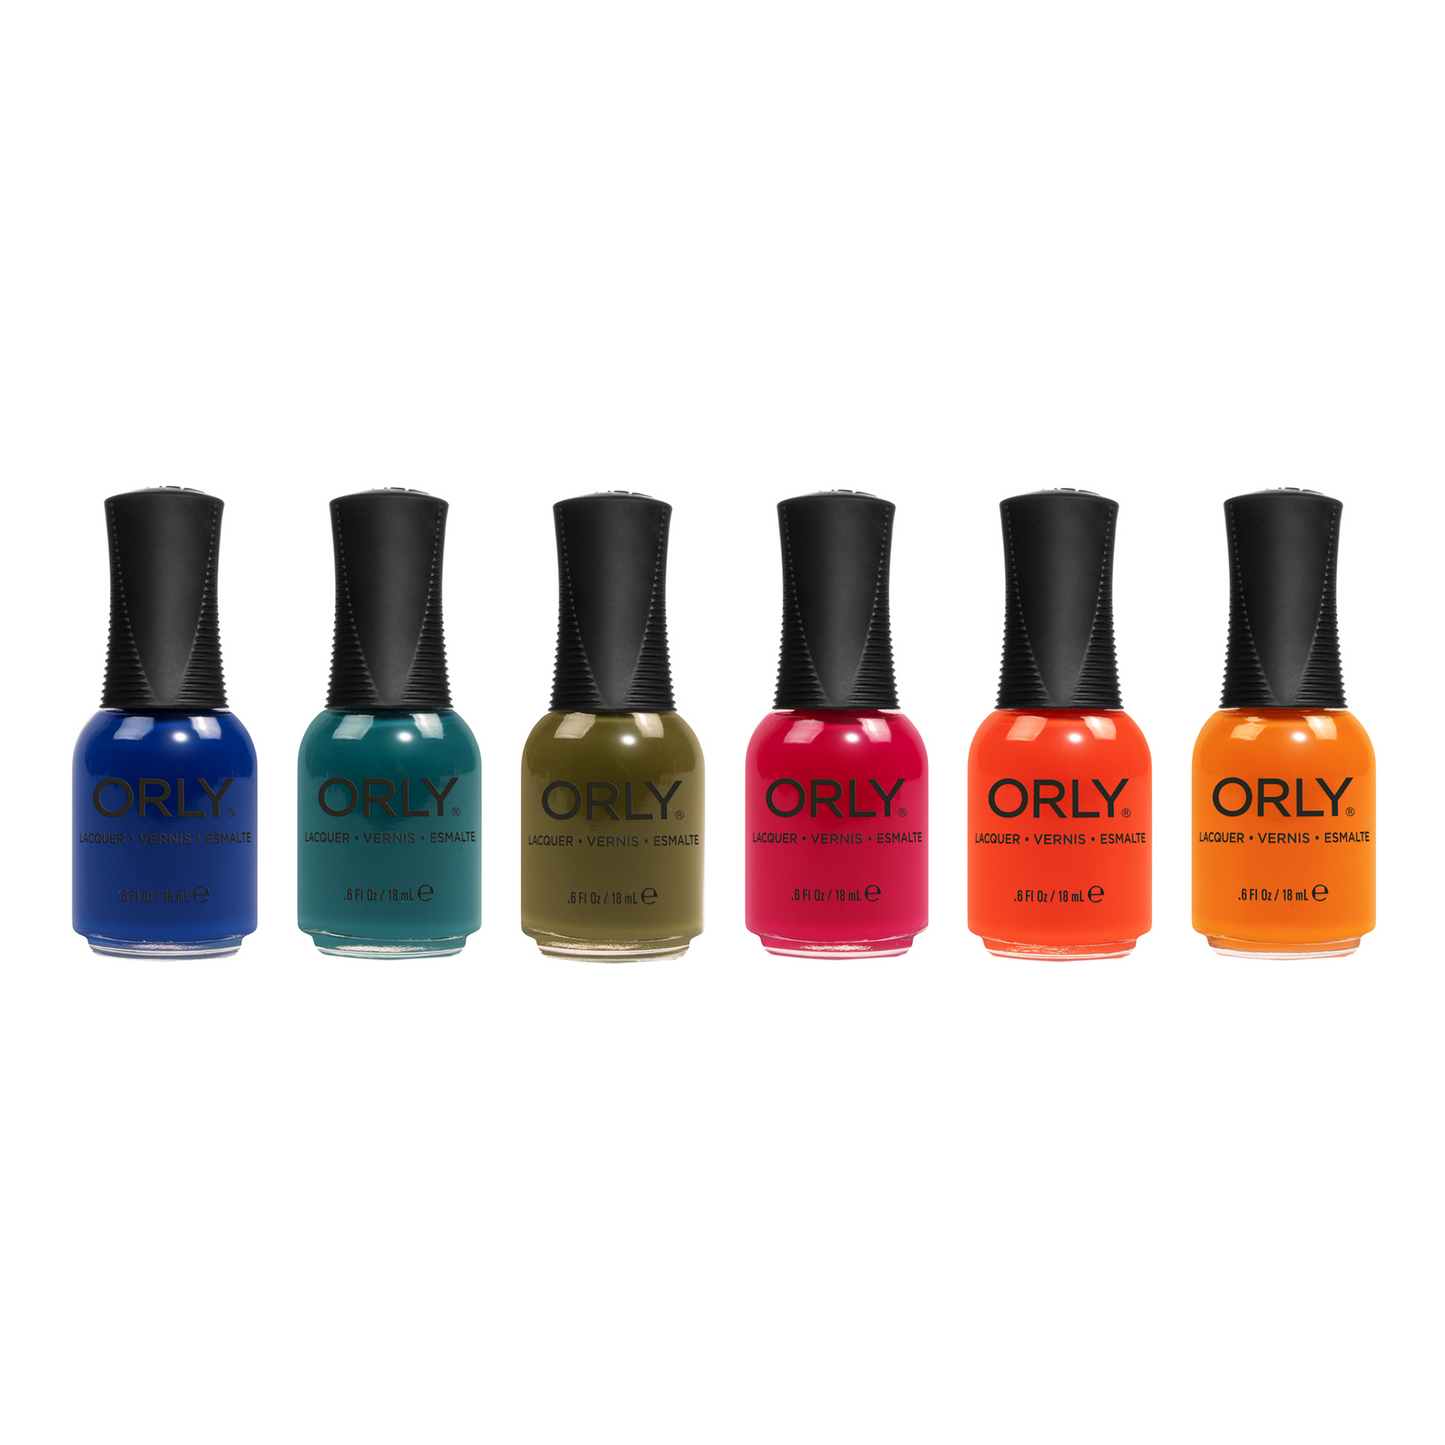 orly nail polish, Wild Natured Fall 2021 Collection Classique Nails Beauty Supply Inc.